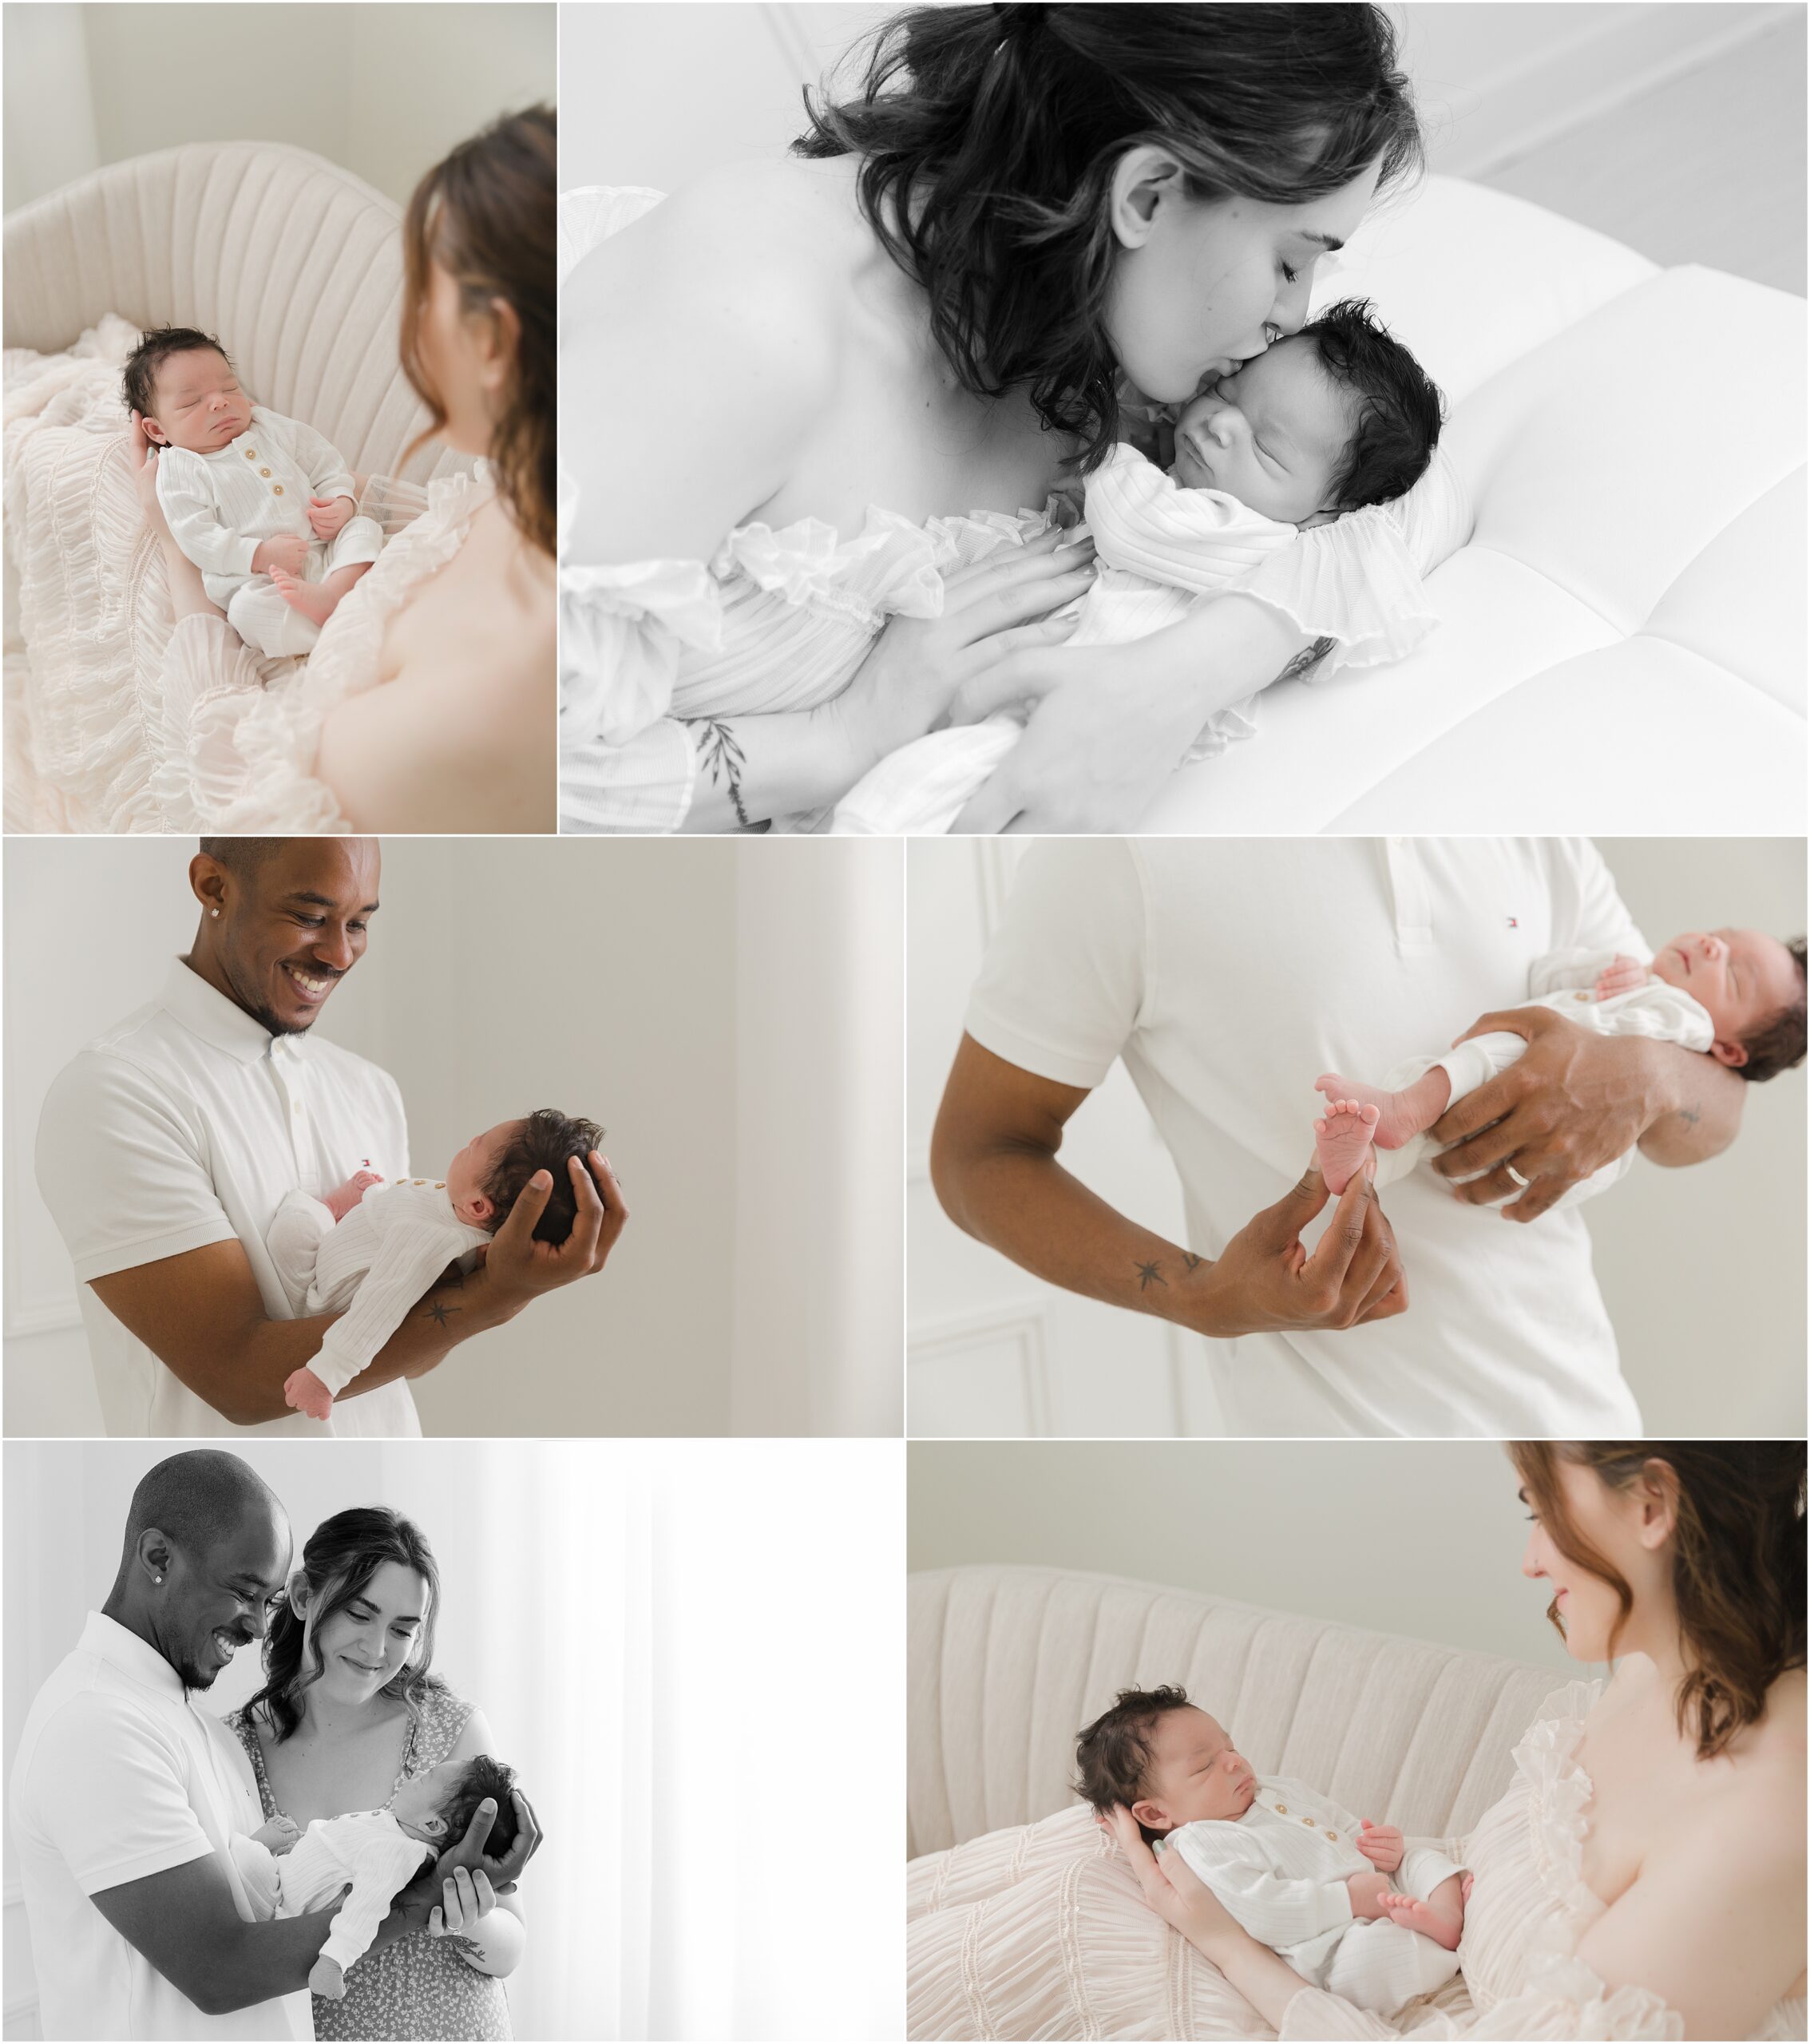 Collage of photos of newborn baby being cradled and looked at lovingly by his mom and dad